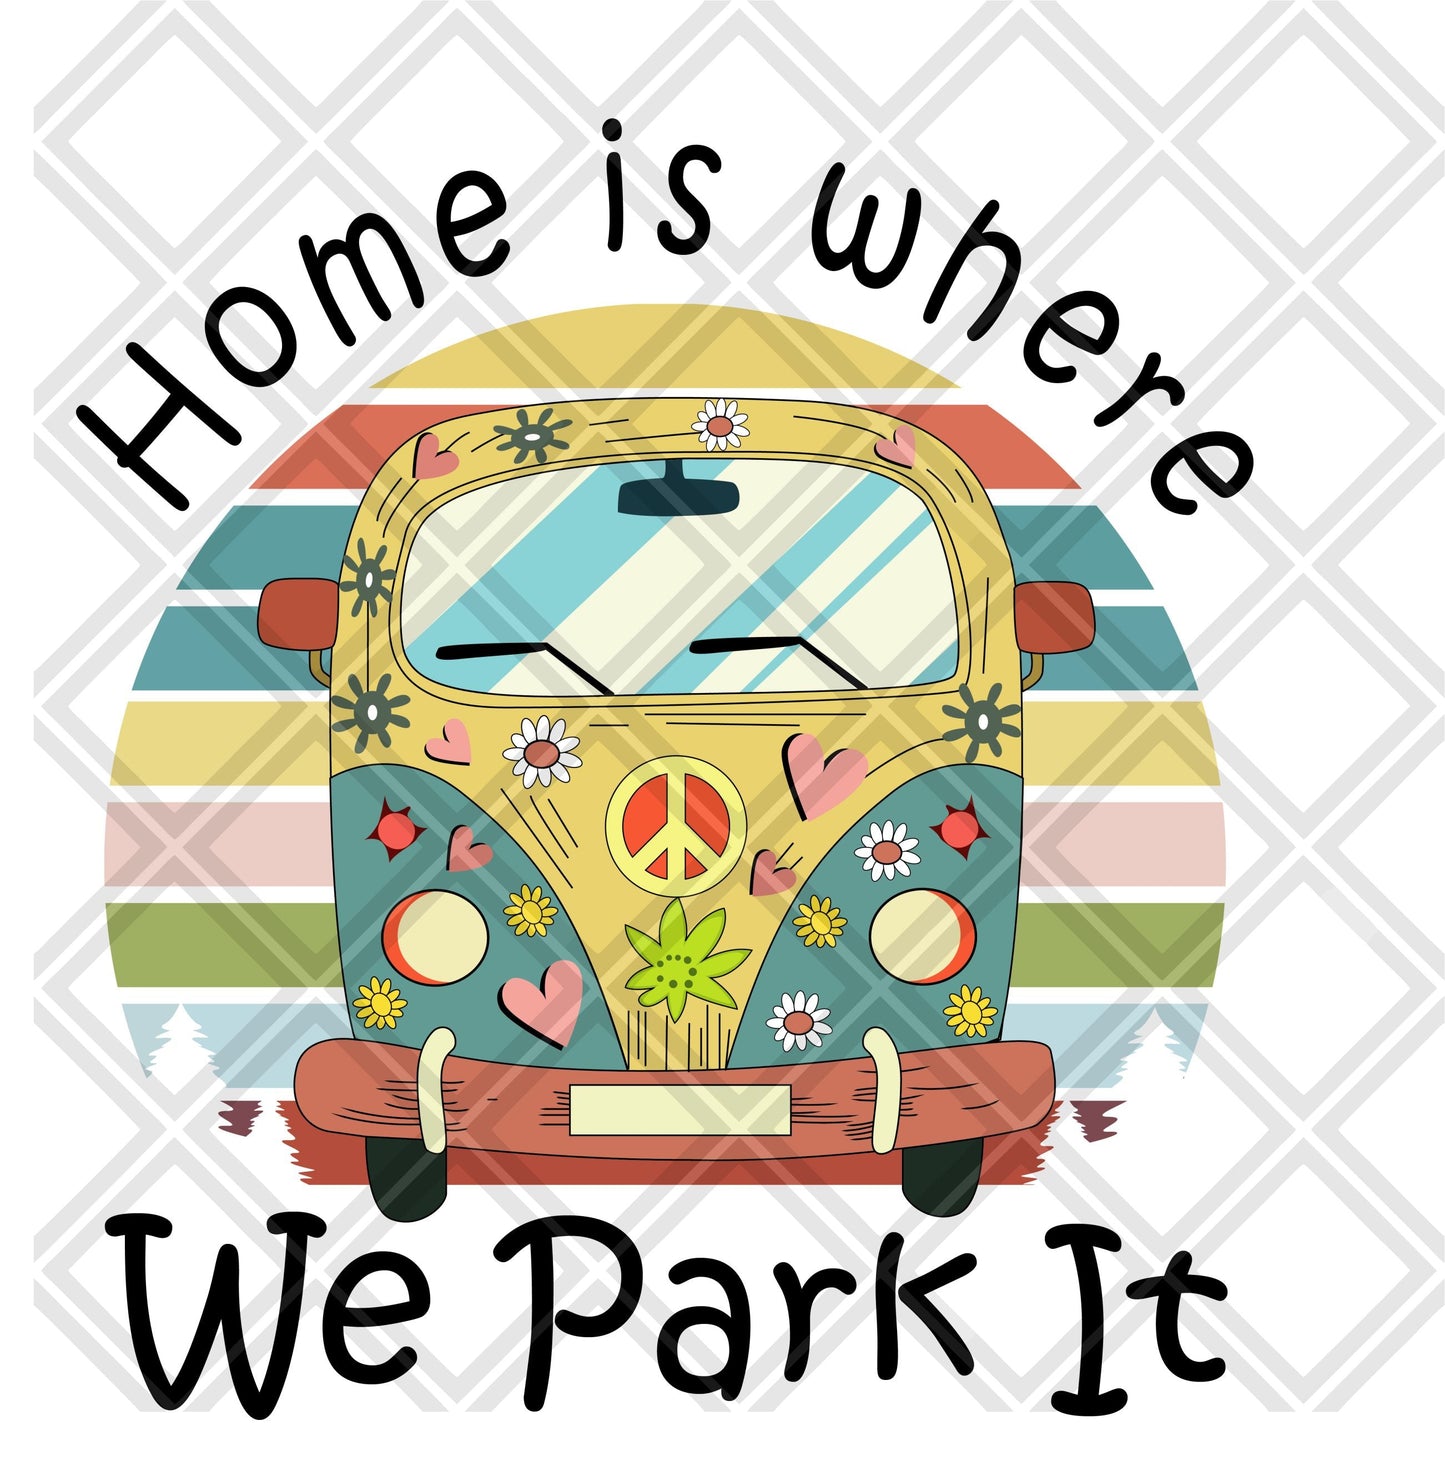 Home is where we park it frame Digital Download Instand Download